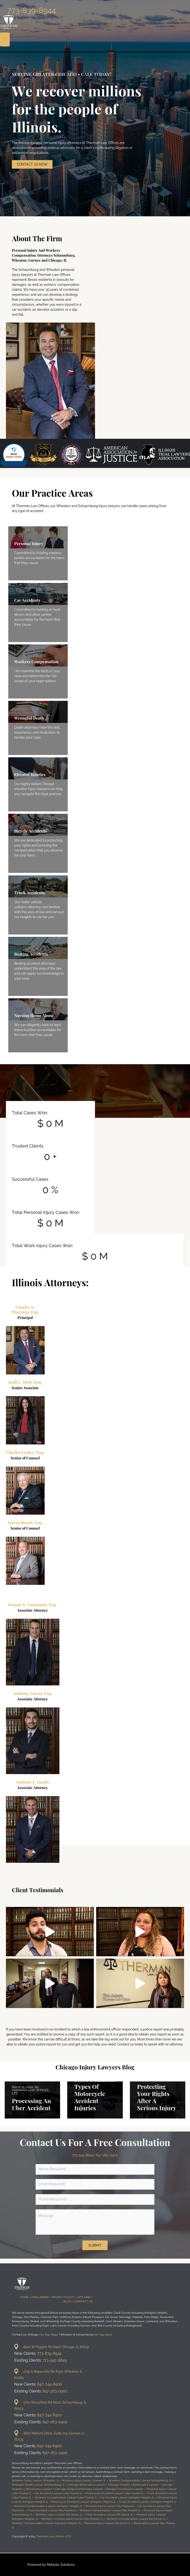 Therman Law Offices, LTD - Chicago IL Lawyers